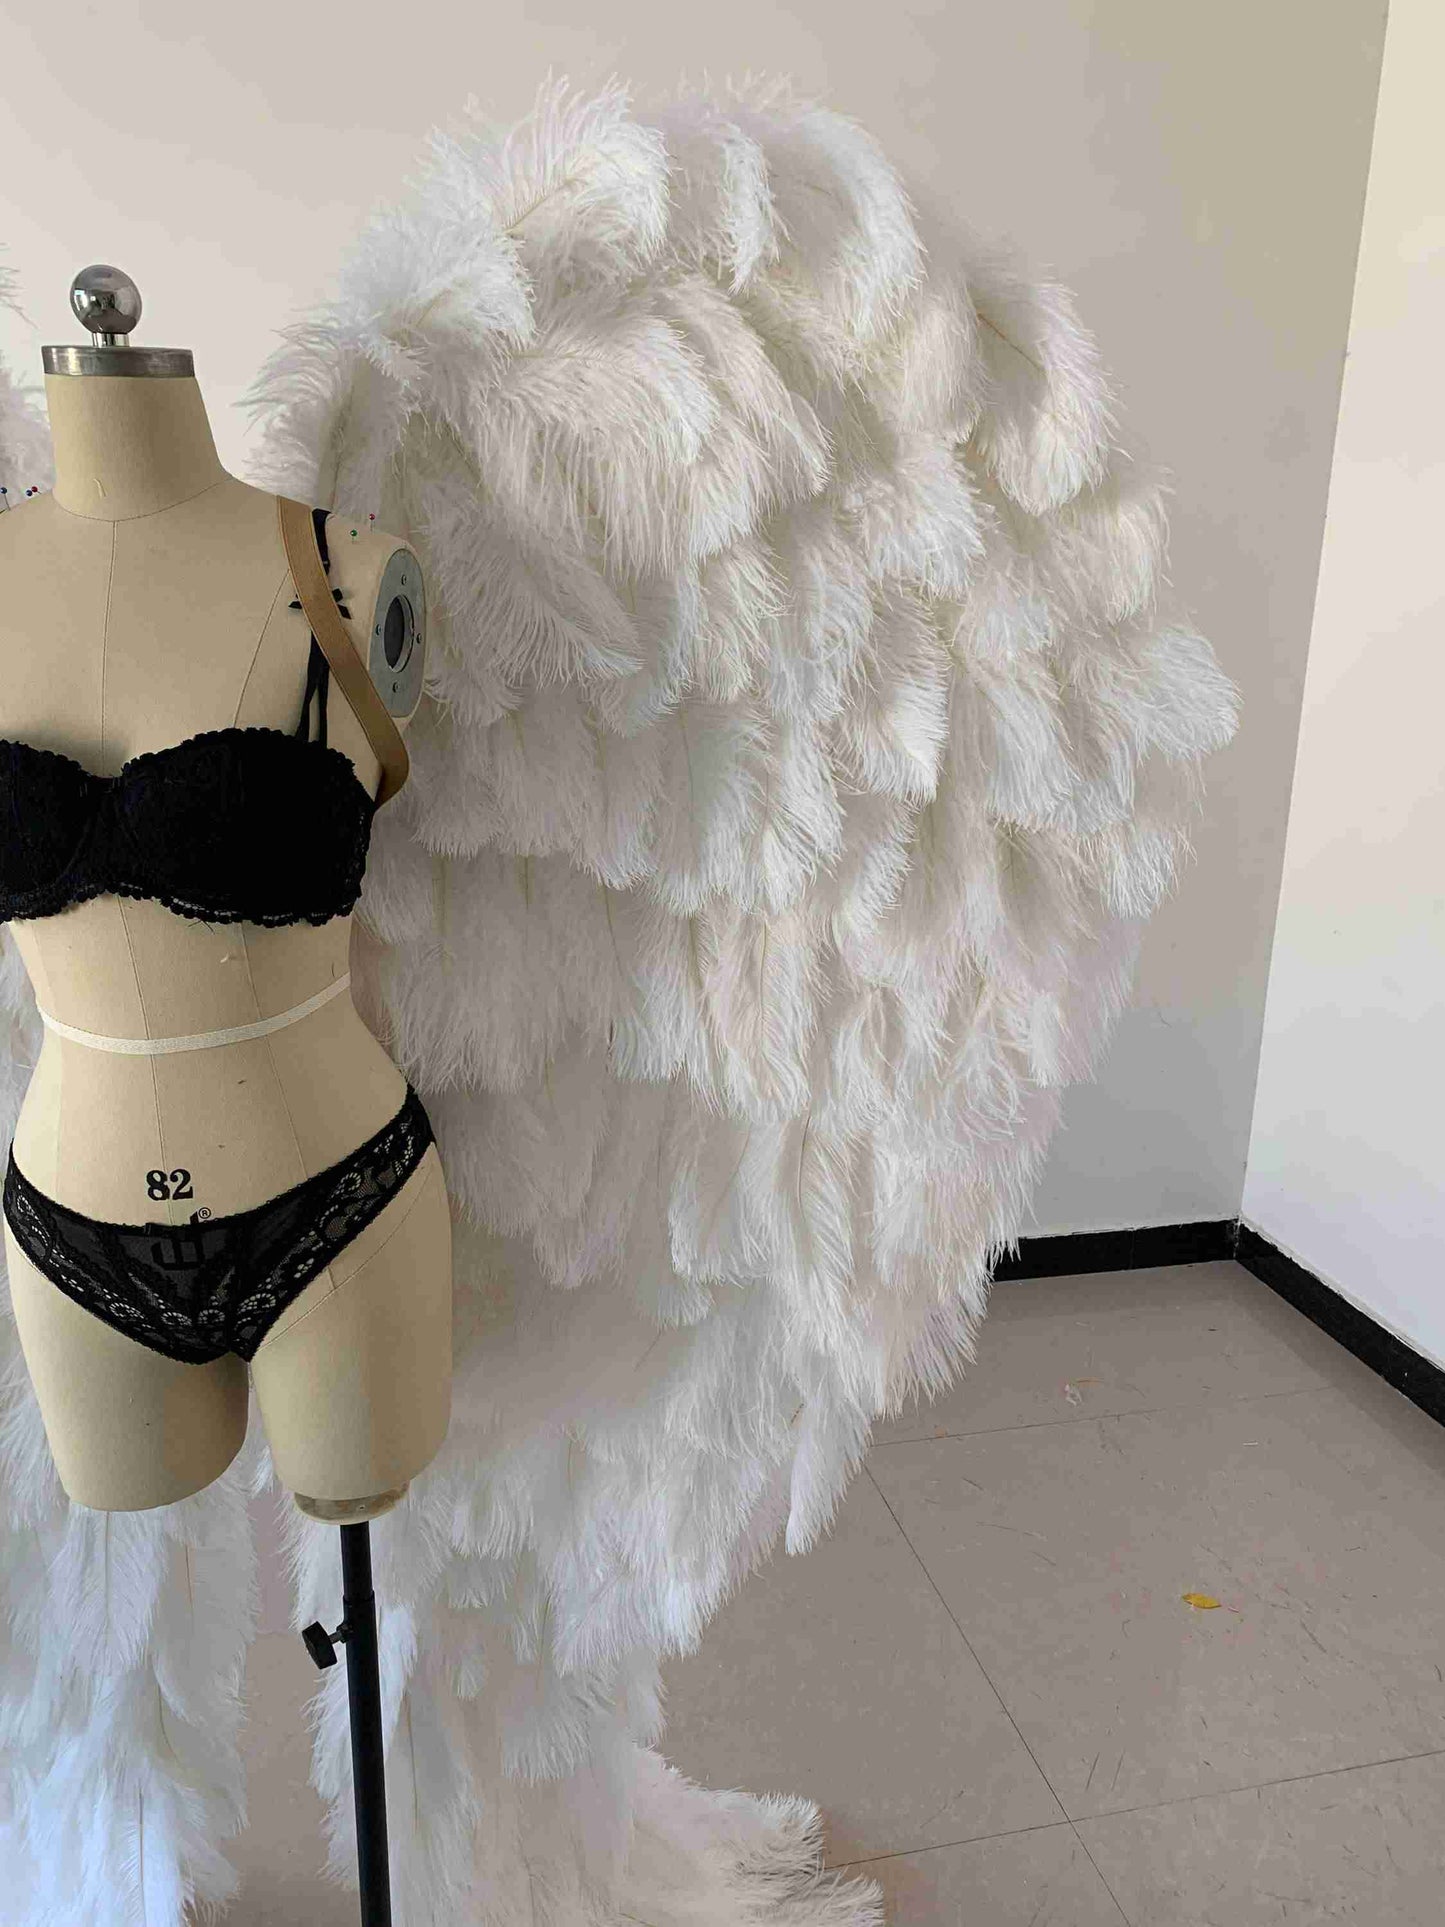 Our luxury white angel wings from the close view. Made from ostrich feathers. Wings for angel costume. Suitable for photoshoots especially for boudoirs.